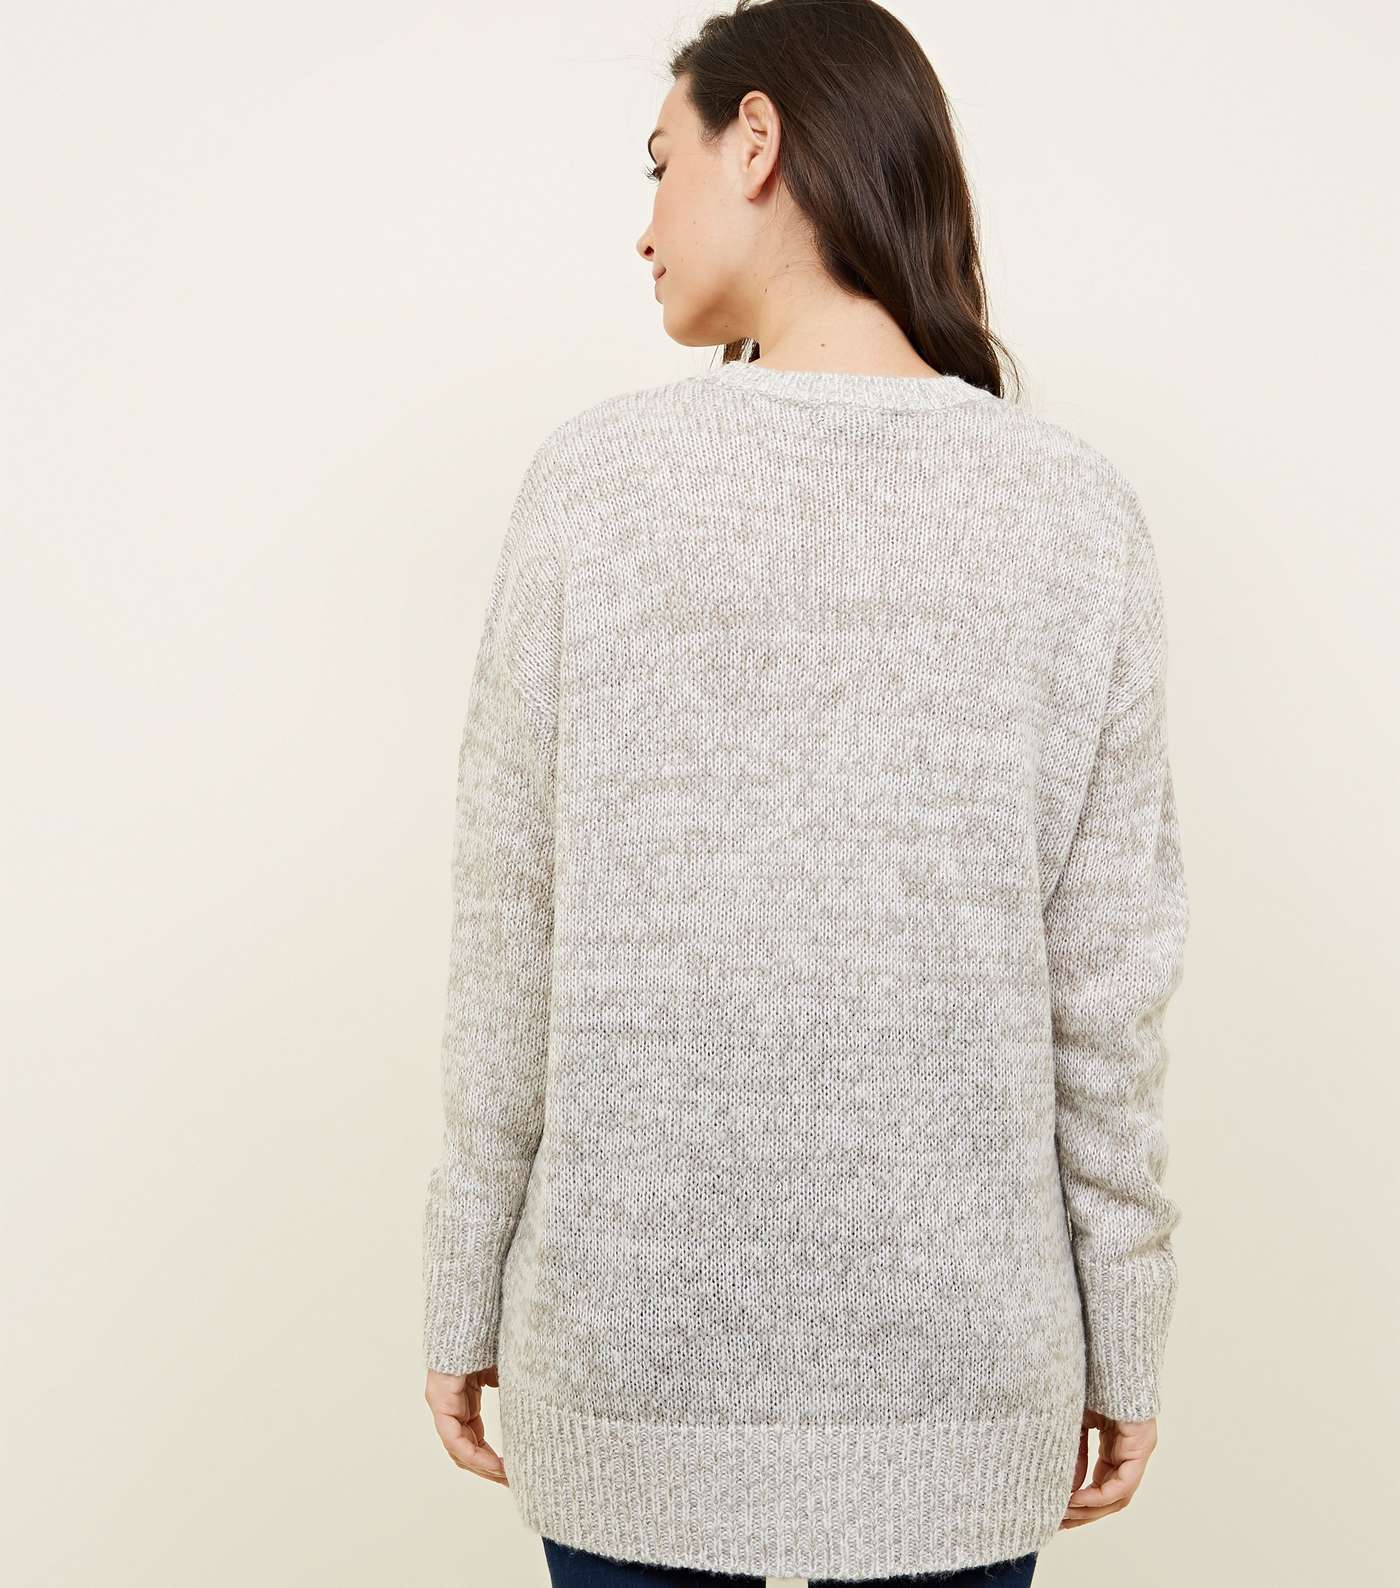 Maternity Pale Grey Knitted Jumper Image 3